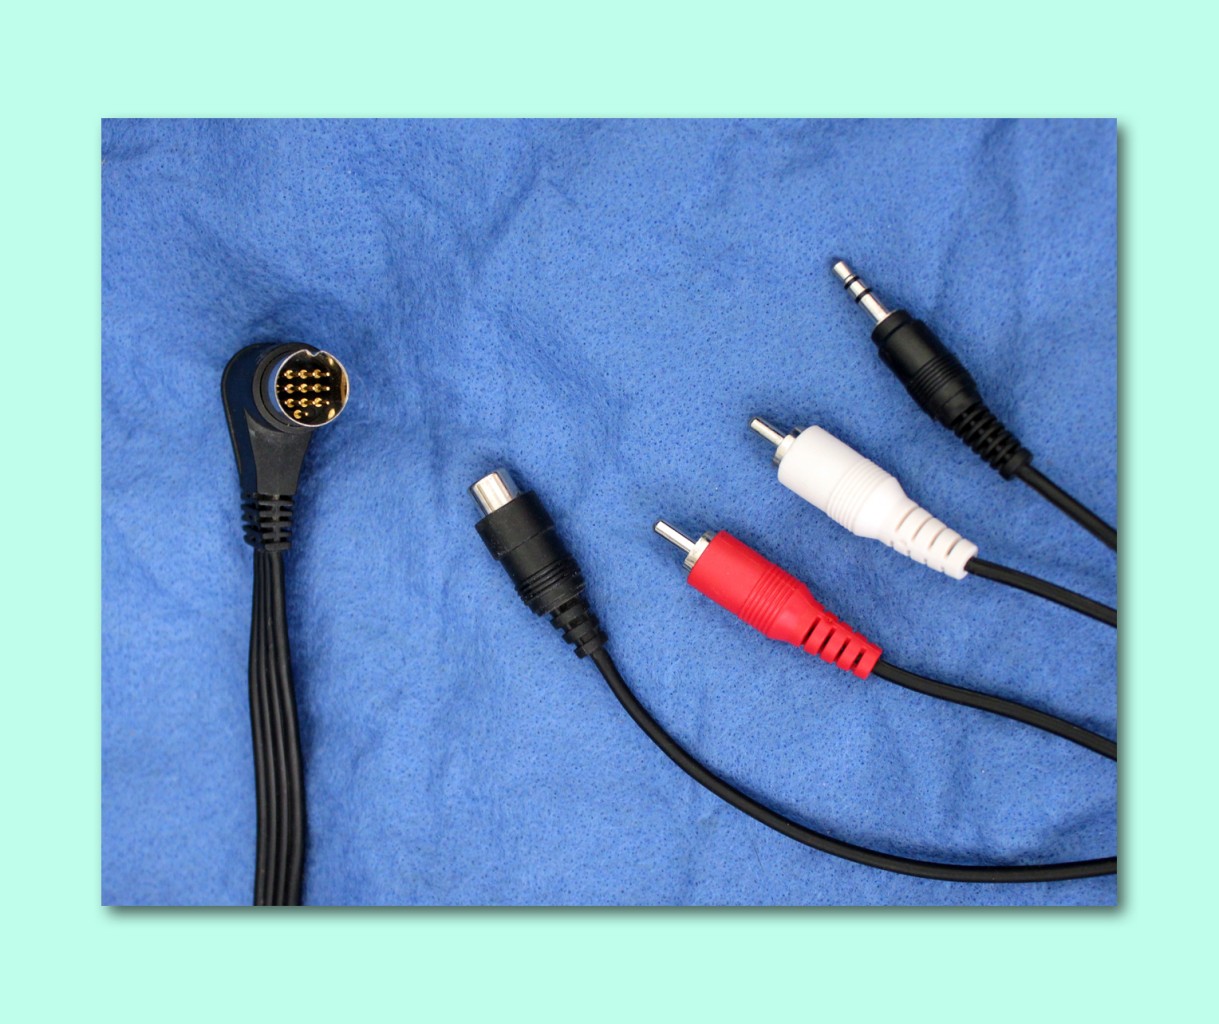 Bose 13-PIN CABLE PC 3-2-1 AV3-2-1 Series II III Subwoofer Media din data cord 